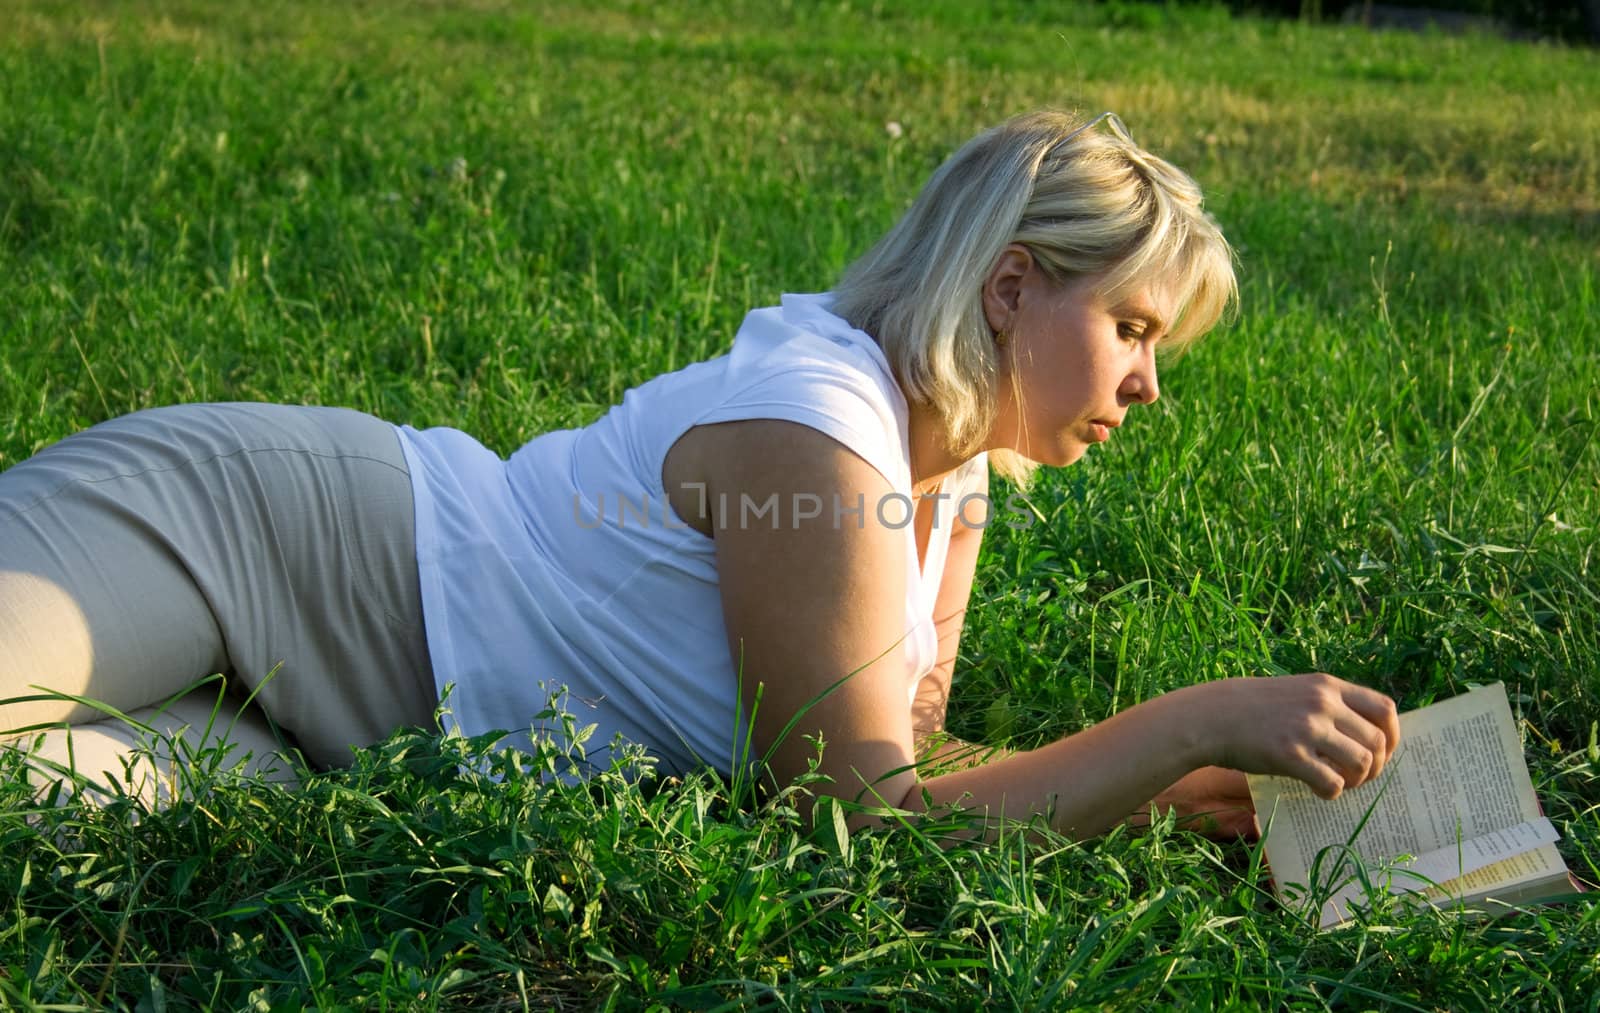 The young woman reads the book, laying on a grass